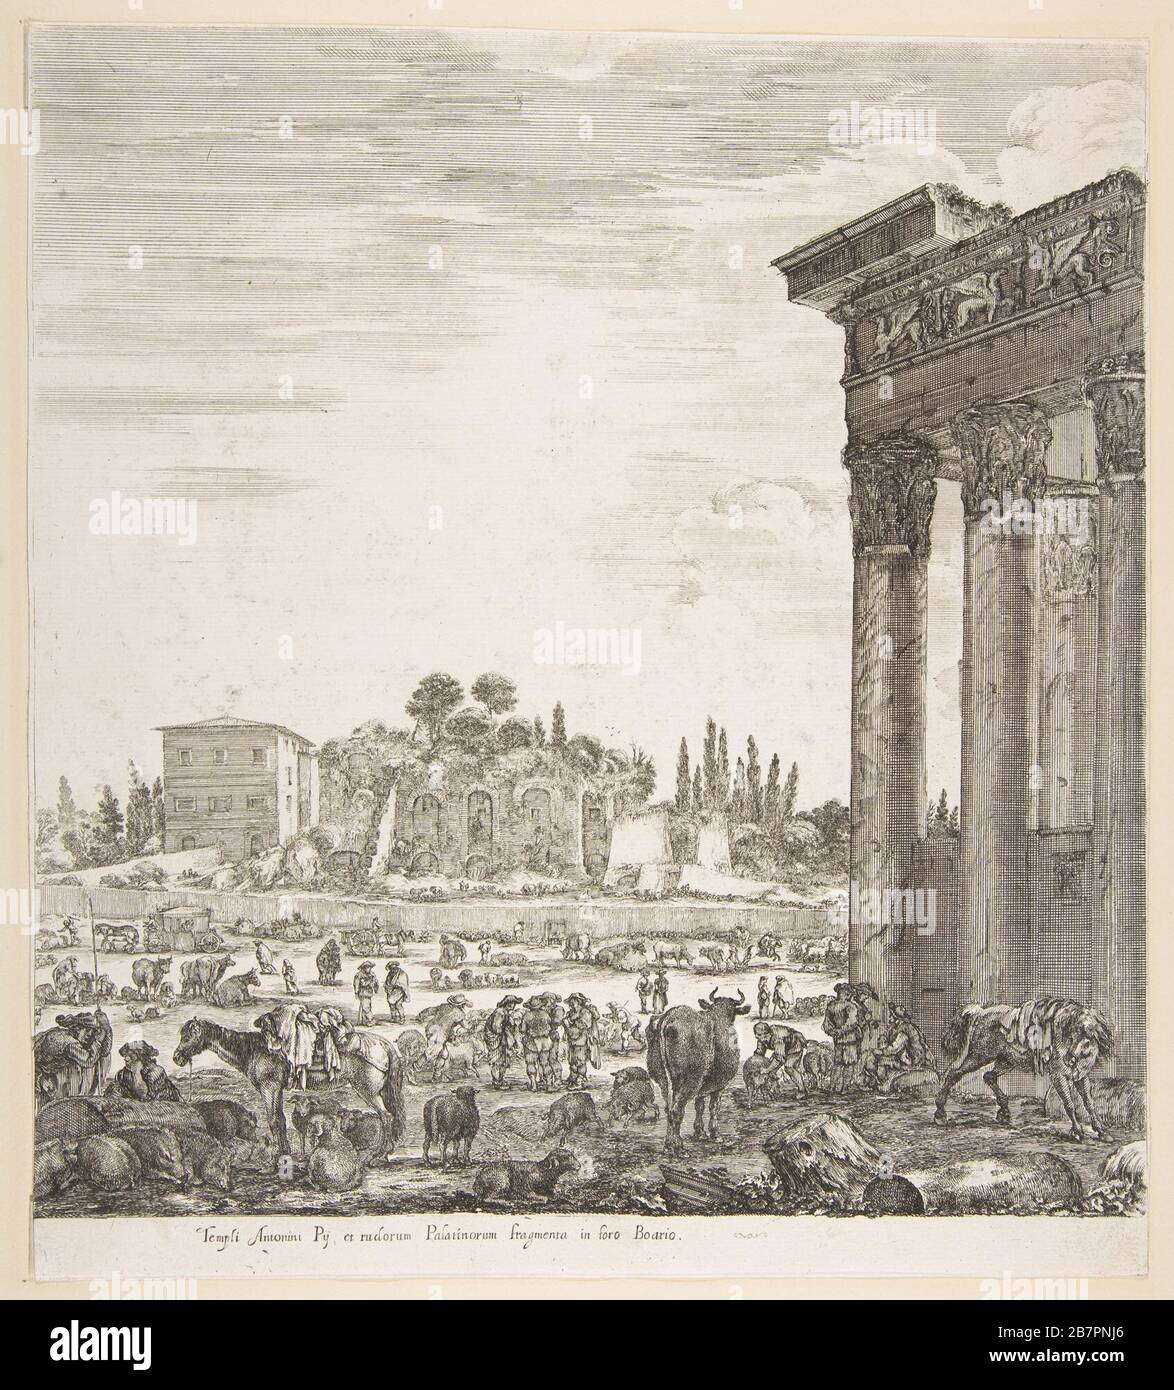 The columns of the Temple of Antoninus to right, a part of the Campo Vaccino in center and at left, along with various animals and figures, the Palatine ruins in the background, from 'Six large views, four of Rome, and two of the Roman countryside' (Six grandes vues, dont quatre de Rome et deux de la Campagne romaine), 1656. Stock Photo